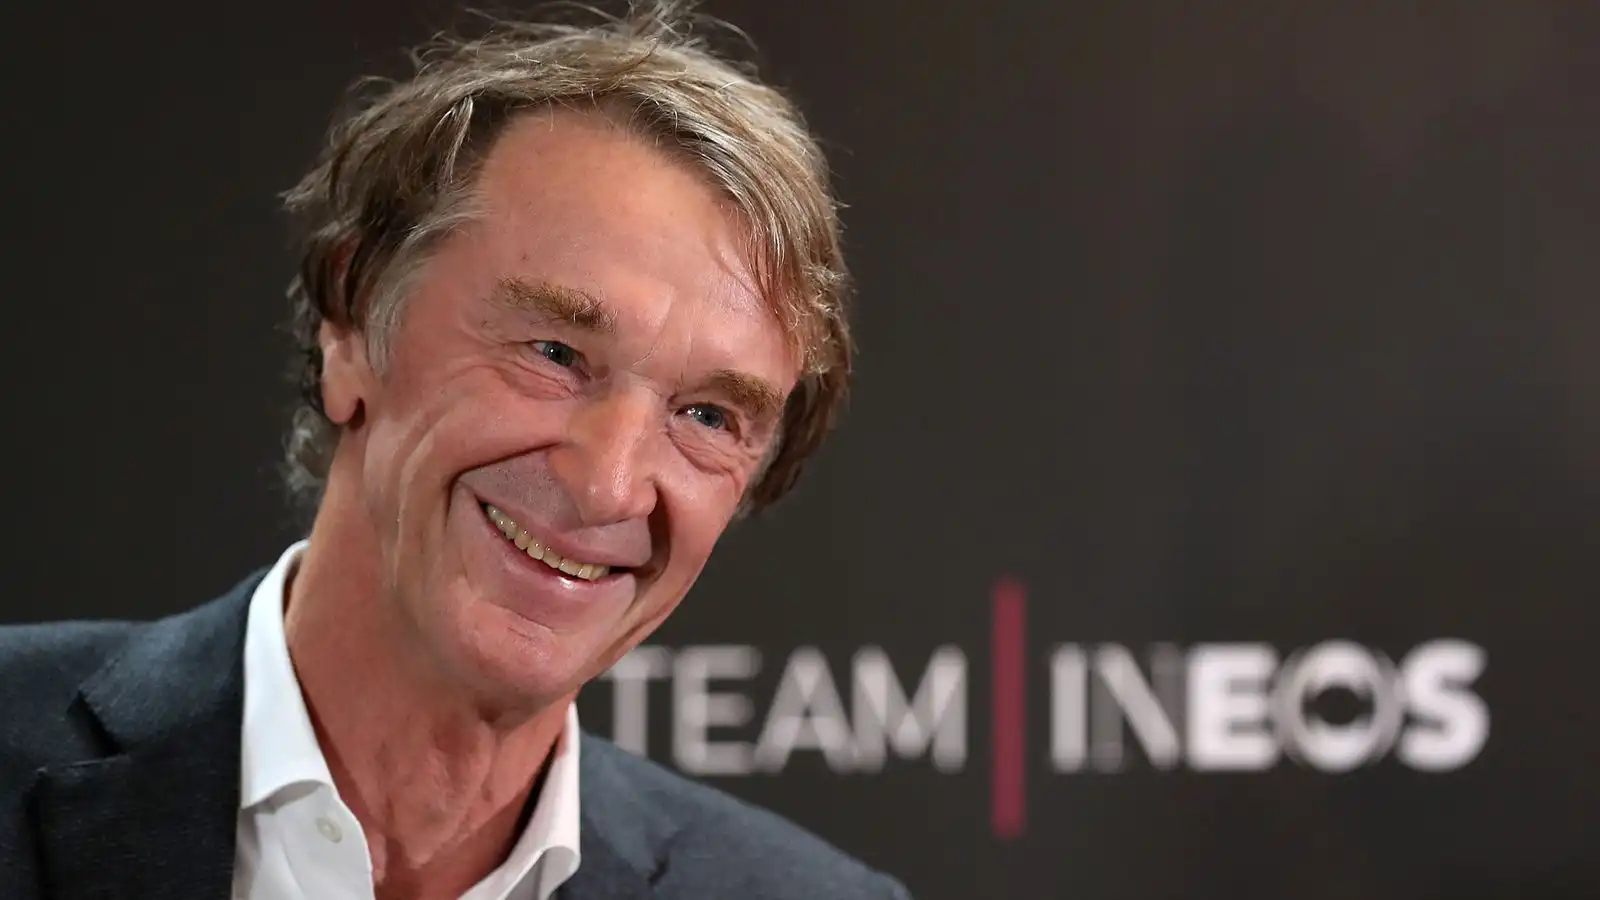 Sir Jim Ratcliffe asks Manchester United fans for time and patience following 25% purchase